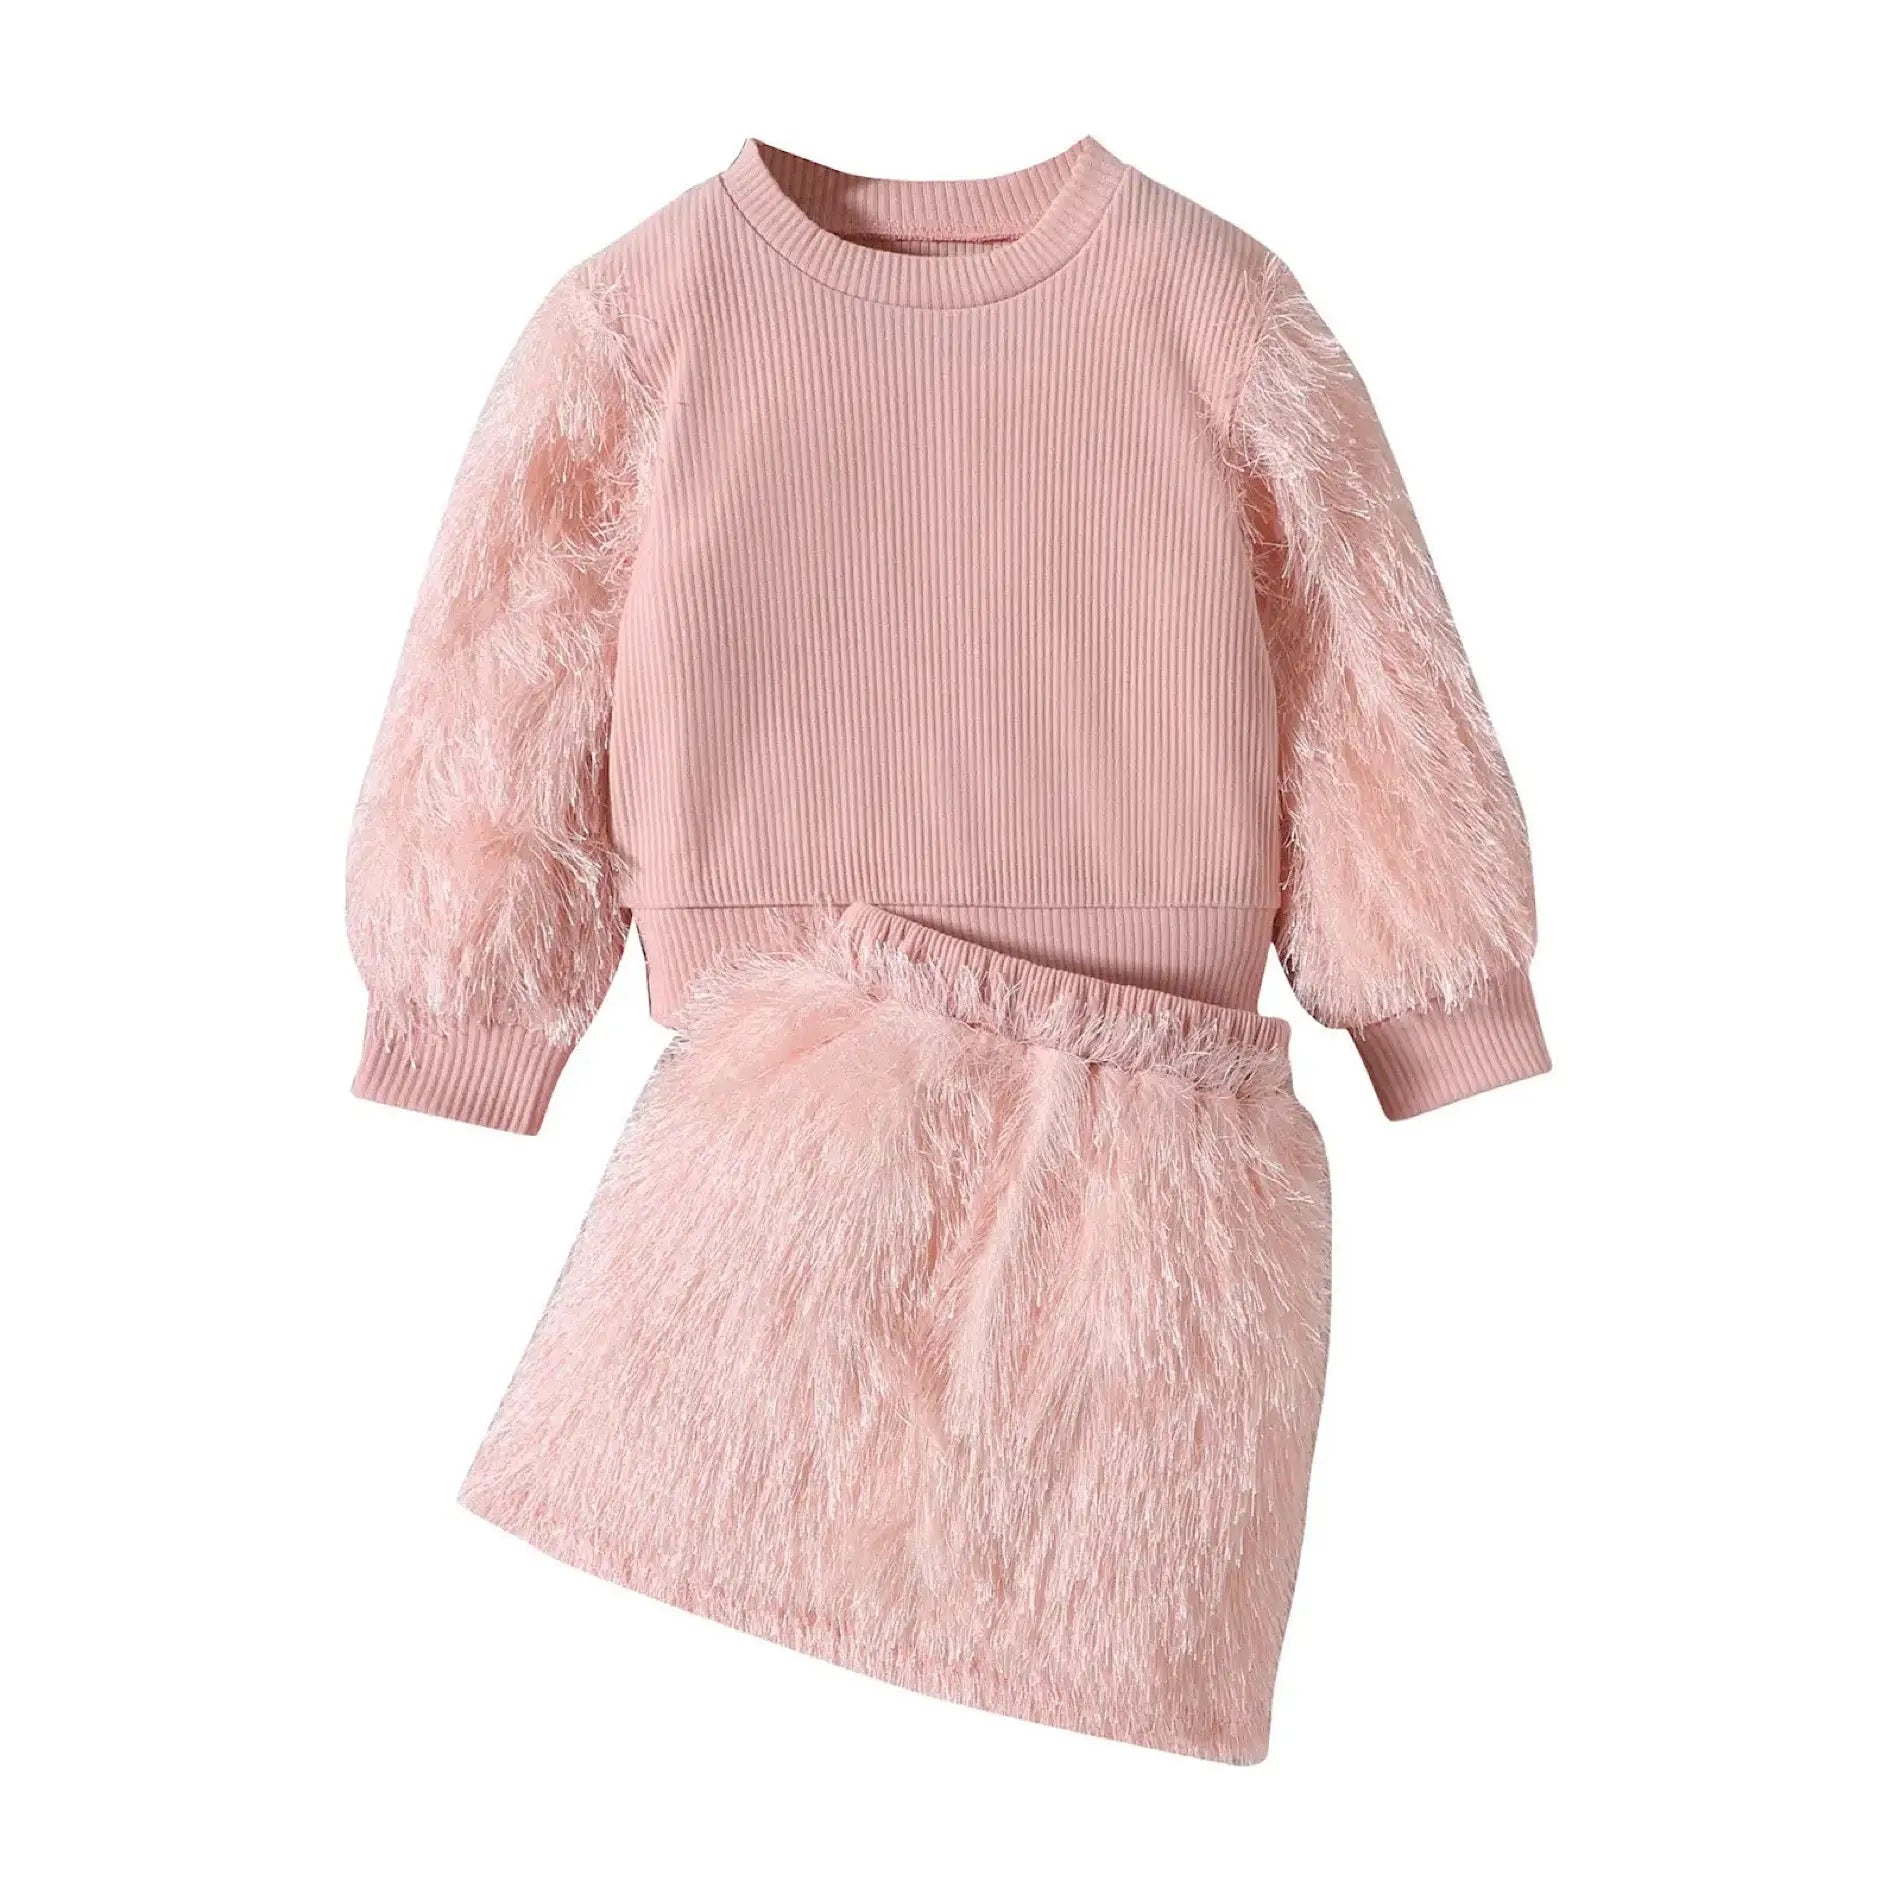 Girls Long Sleeve Pink Sweater and Fuzzy Skirt Two Piece Clothes Set, Main Image